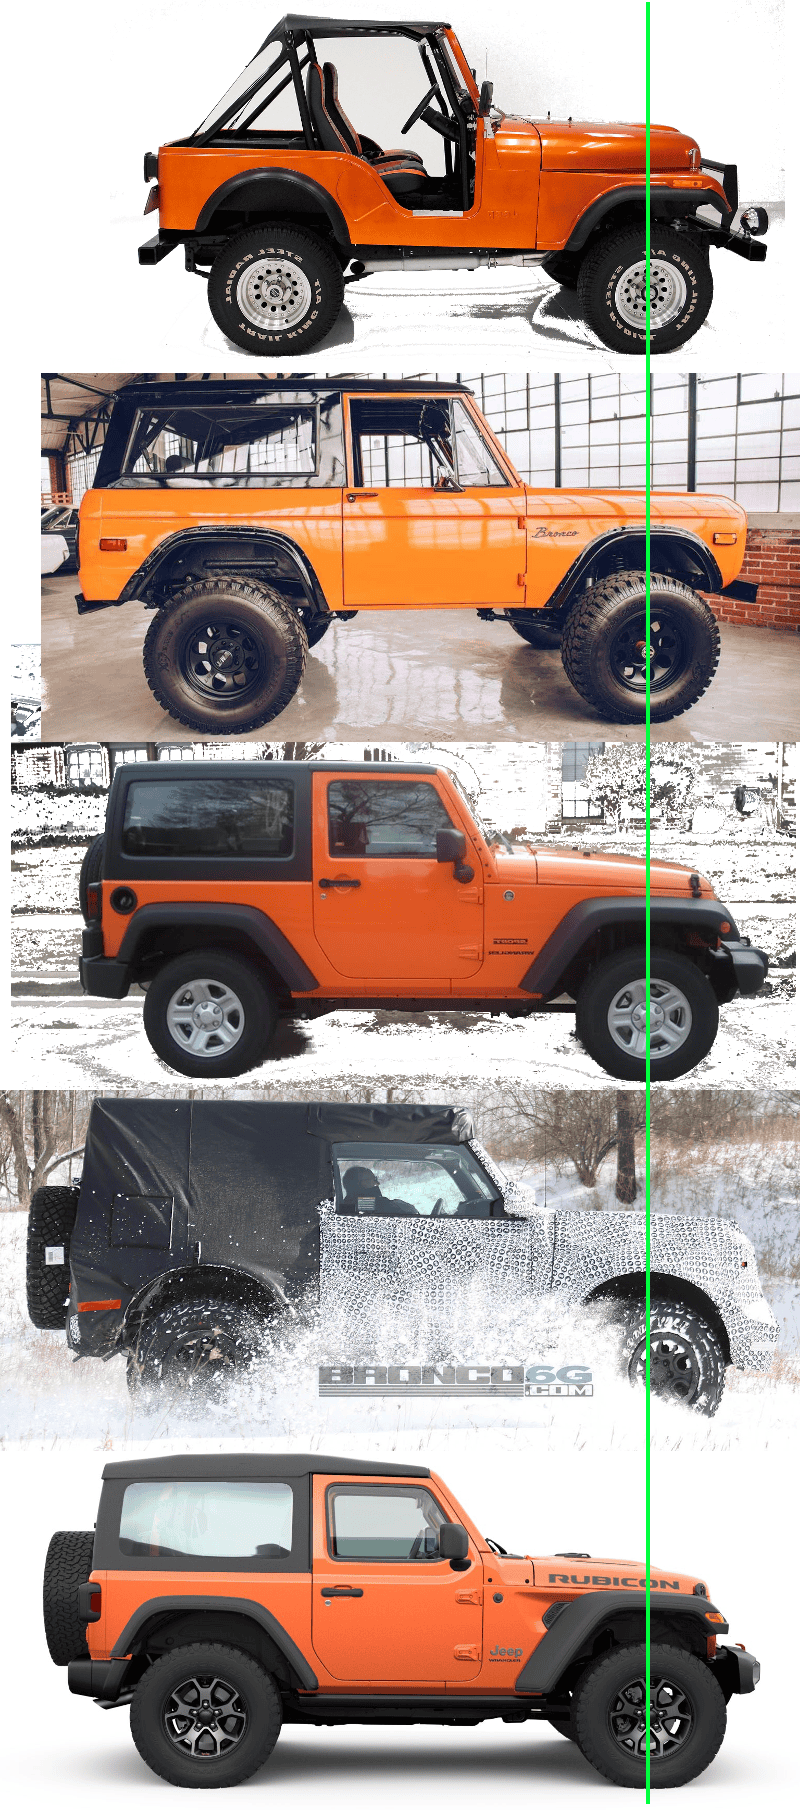 Ford Bronco 2-Door 2021 Bronco Prototype Makes Grand First Appearance, Bombing Through Snow and Catching Air! 2d Lineup Jeeps vs Broncos small